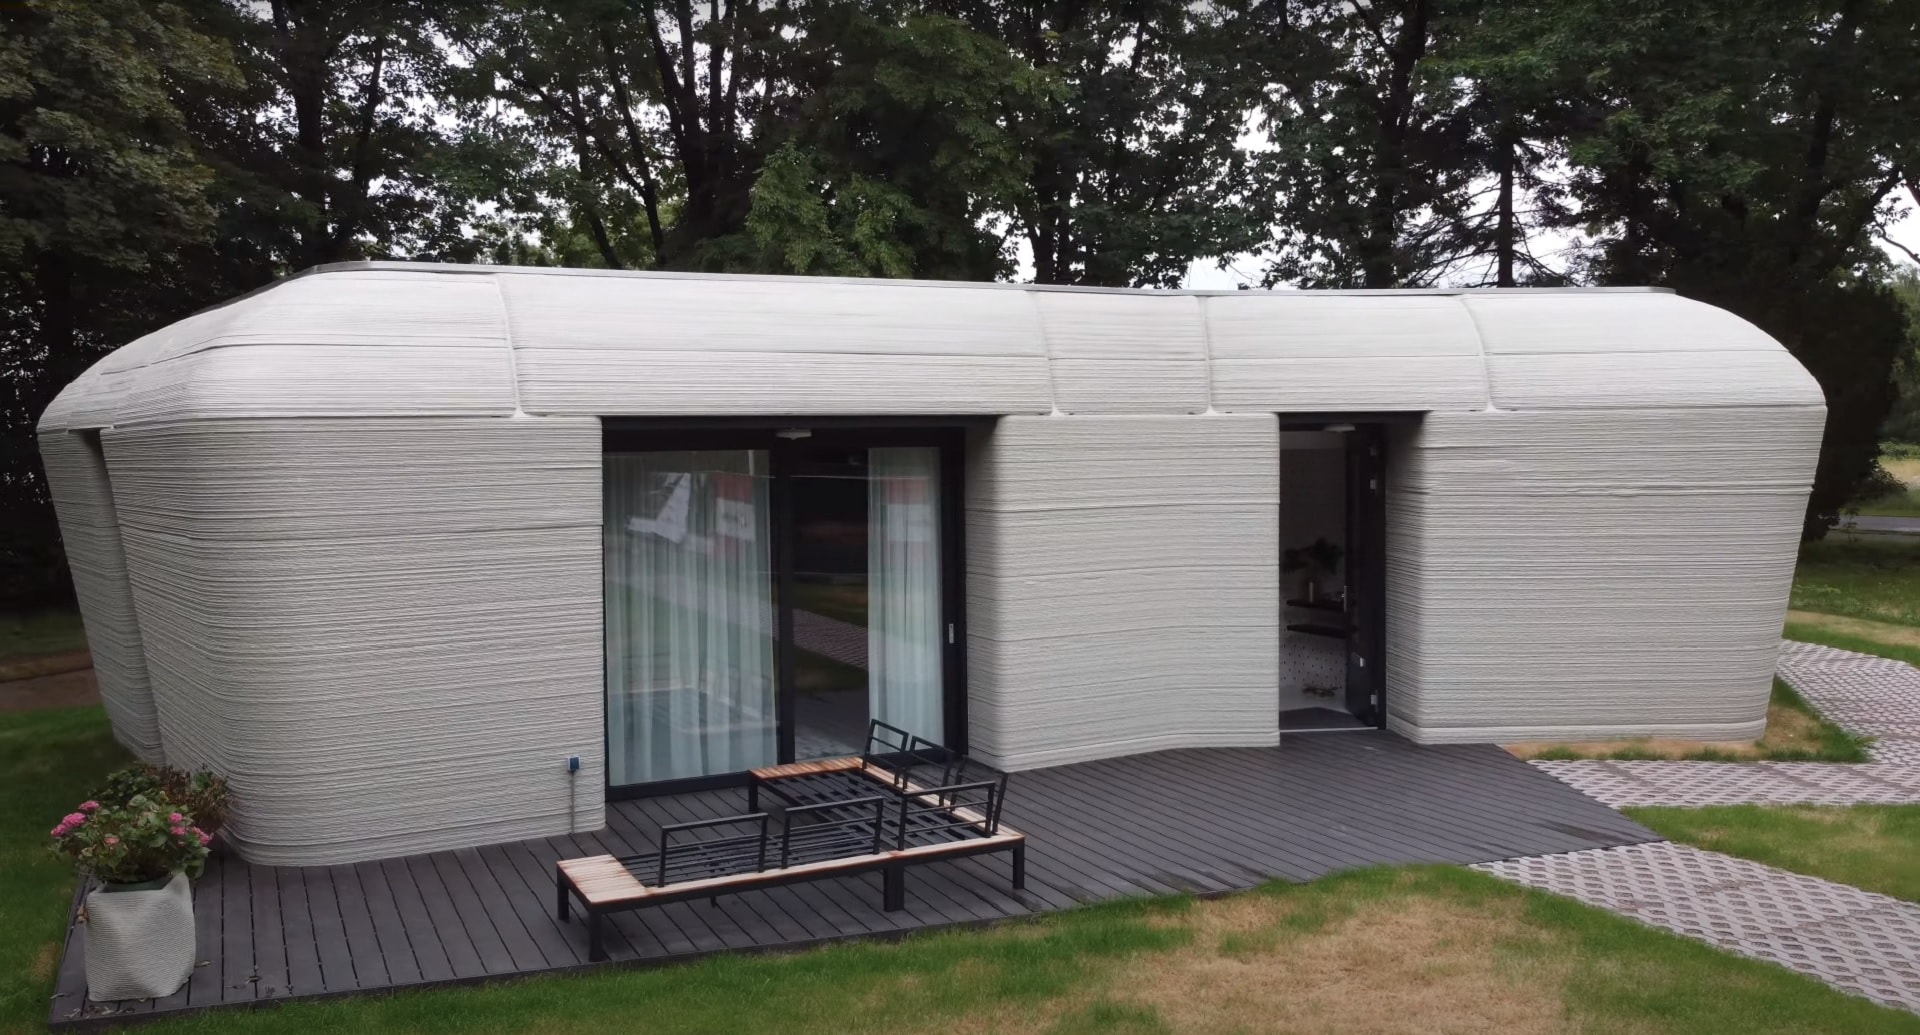 skab Flad Regeringsforordning In the Netherlands You Can Rent Houses That Are 3D-Printed - autoevolution